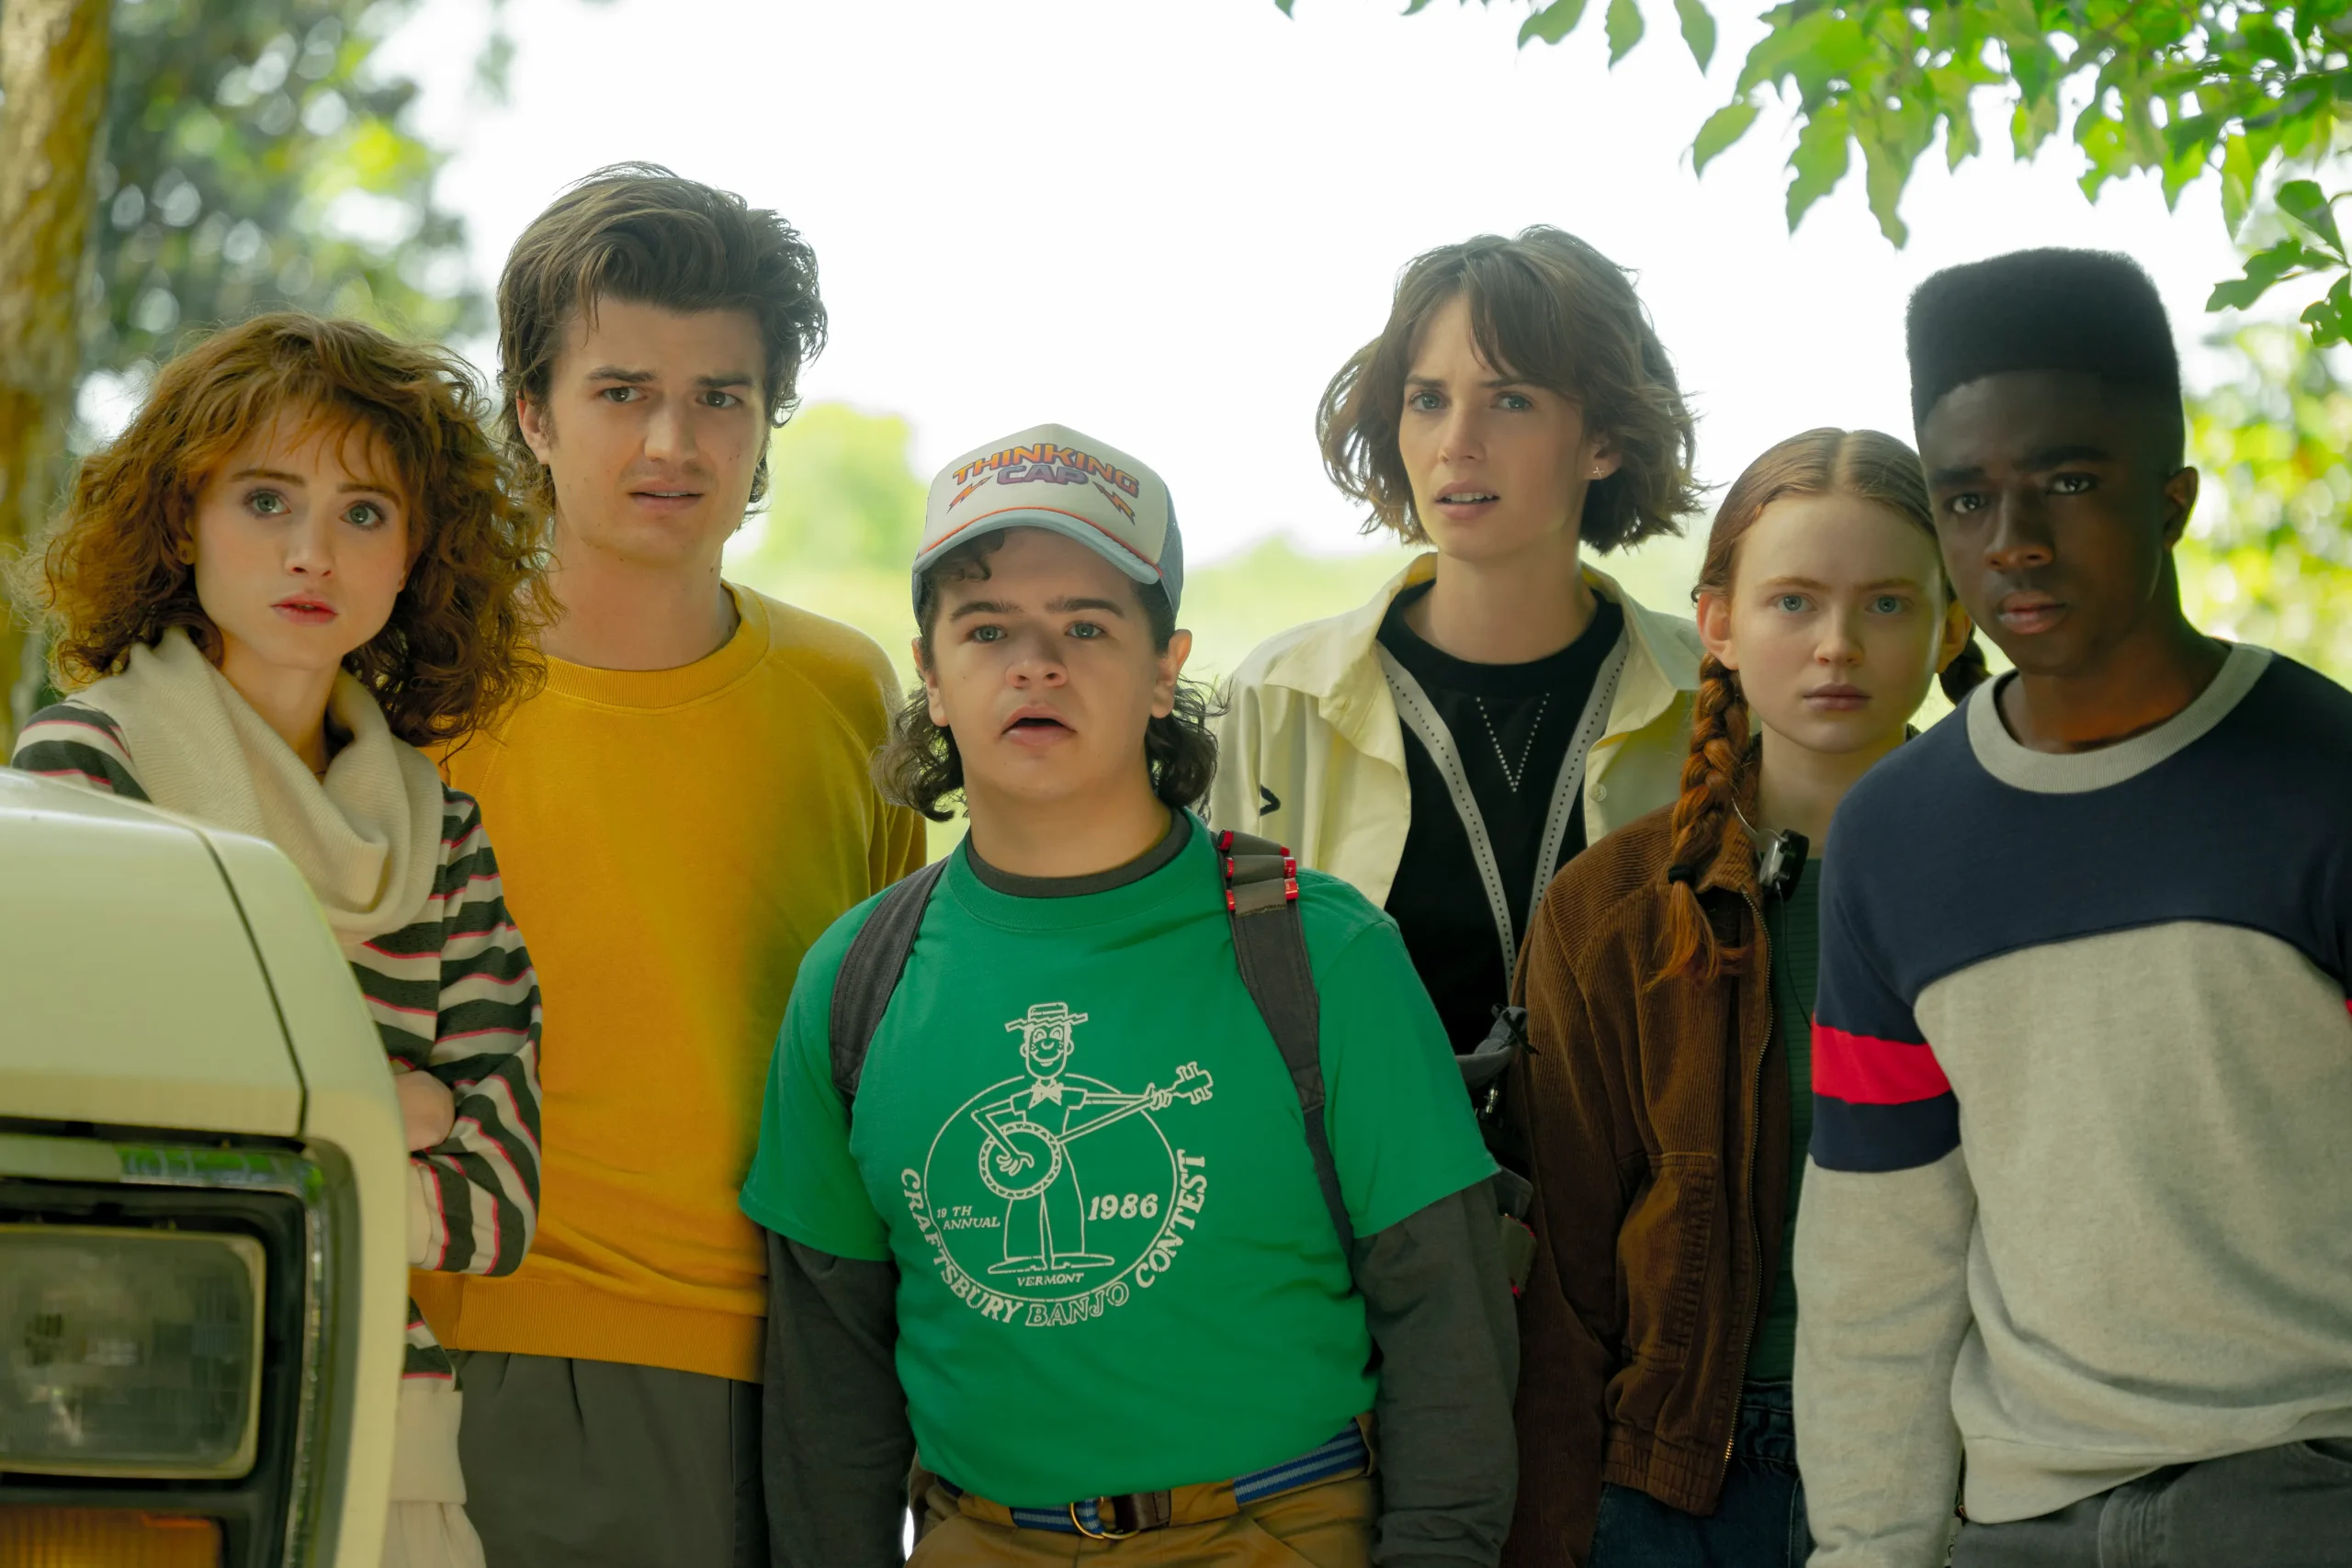 Stranger Things 5: Your Favorite Characters are Back for an Epic, Emotional Finale!